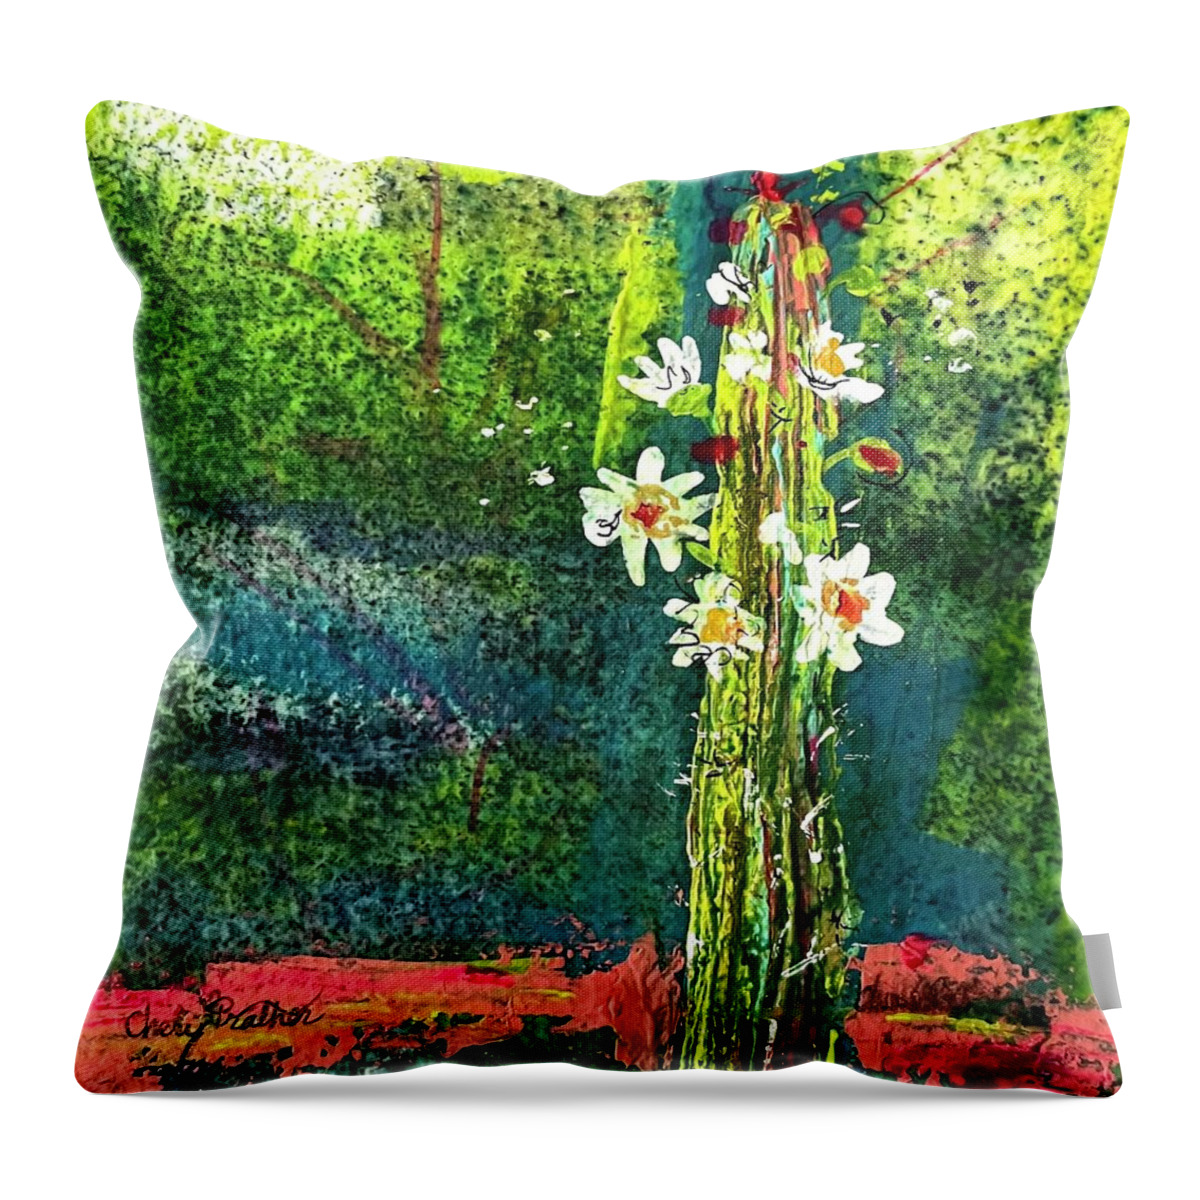 Saguaro Throw Pillow featuring the painting Wild Thing-Cactus Flowers by Cheryl Prather